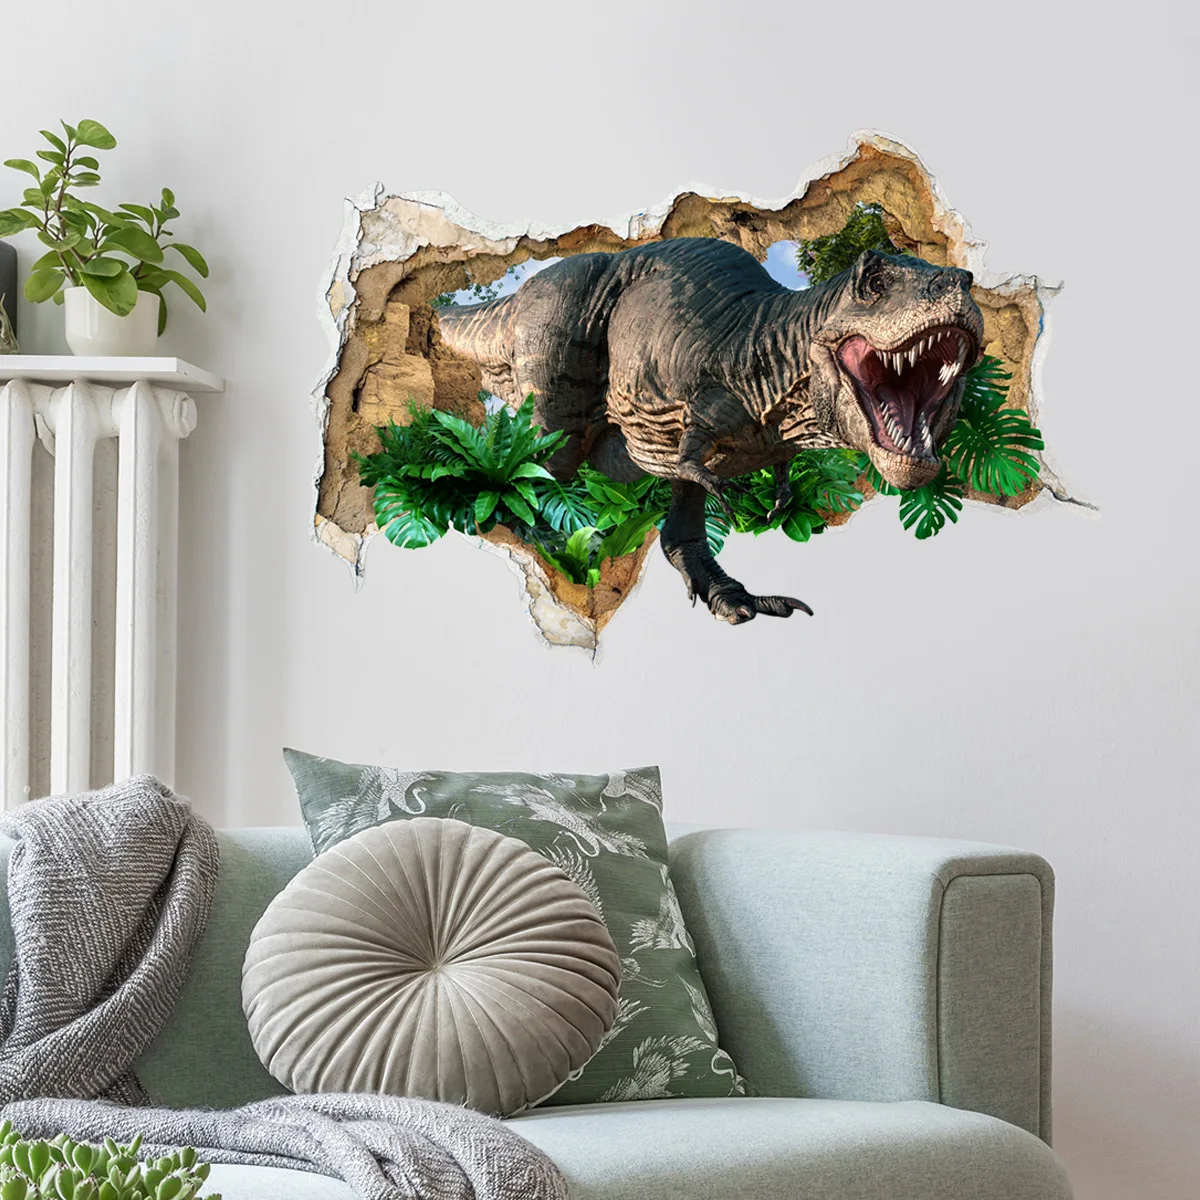 40*60cm Broken Wall Dinosaur Decorative Painting Wall Stickers Background Wall Home Decoration Wall Stickers Wallpaper Atw6009 ins simple style literary abstract card postcard small poster self made wall mounted greeting card decorative wallpaper